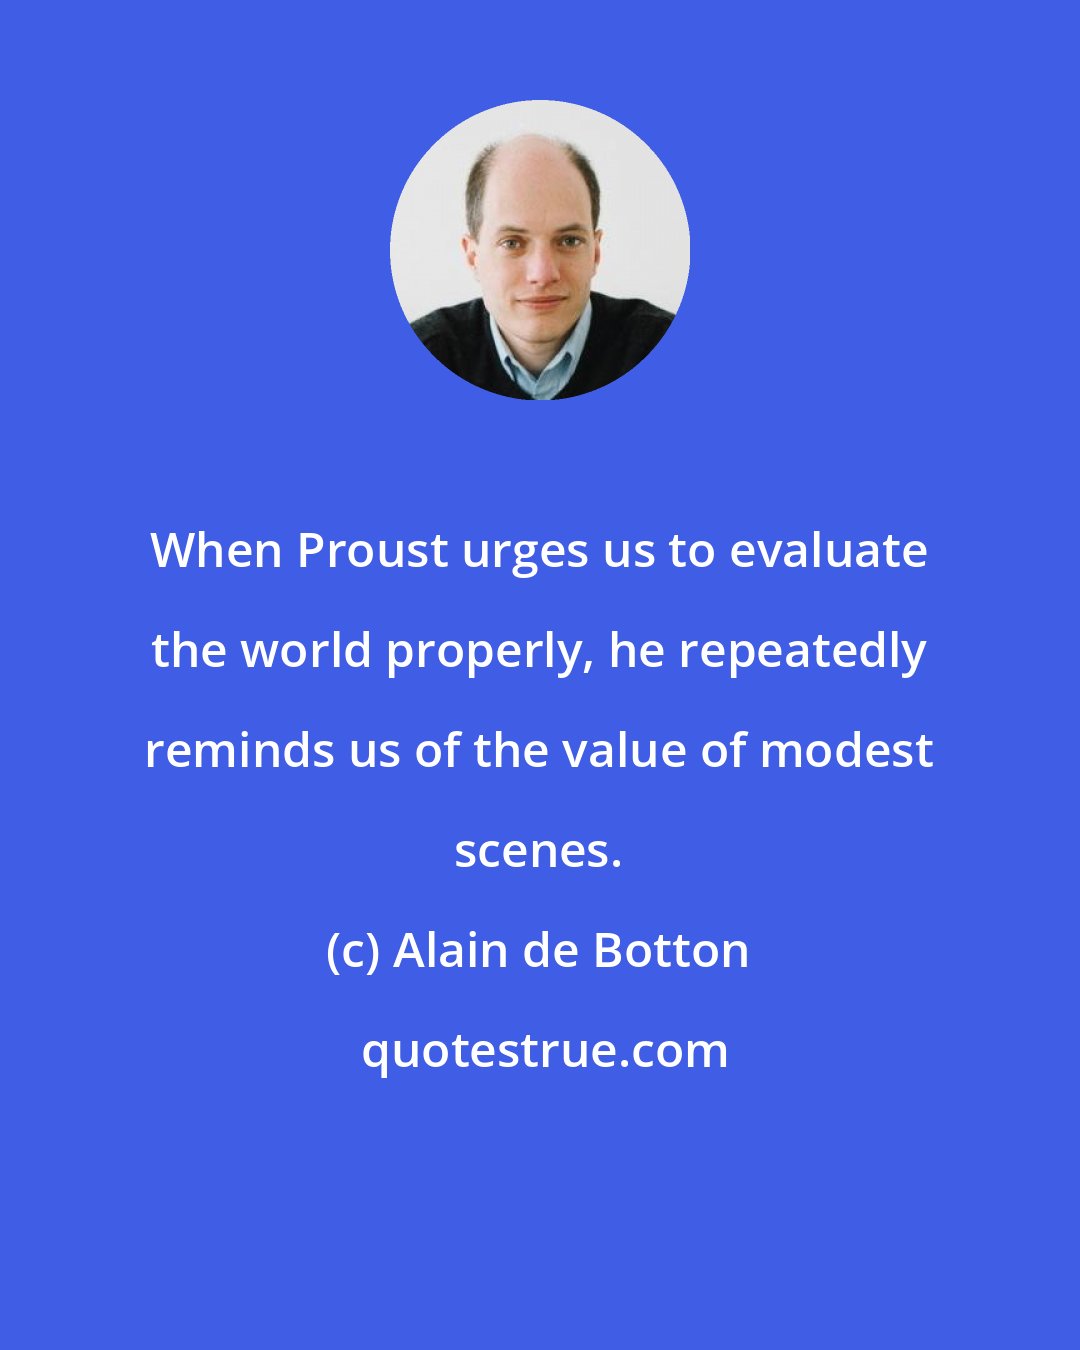 Alain de Botton: When Proust urges us to evaluate the world properly, he repeatedly reminds us of the value of modest scenes.